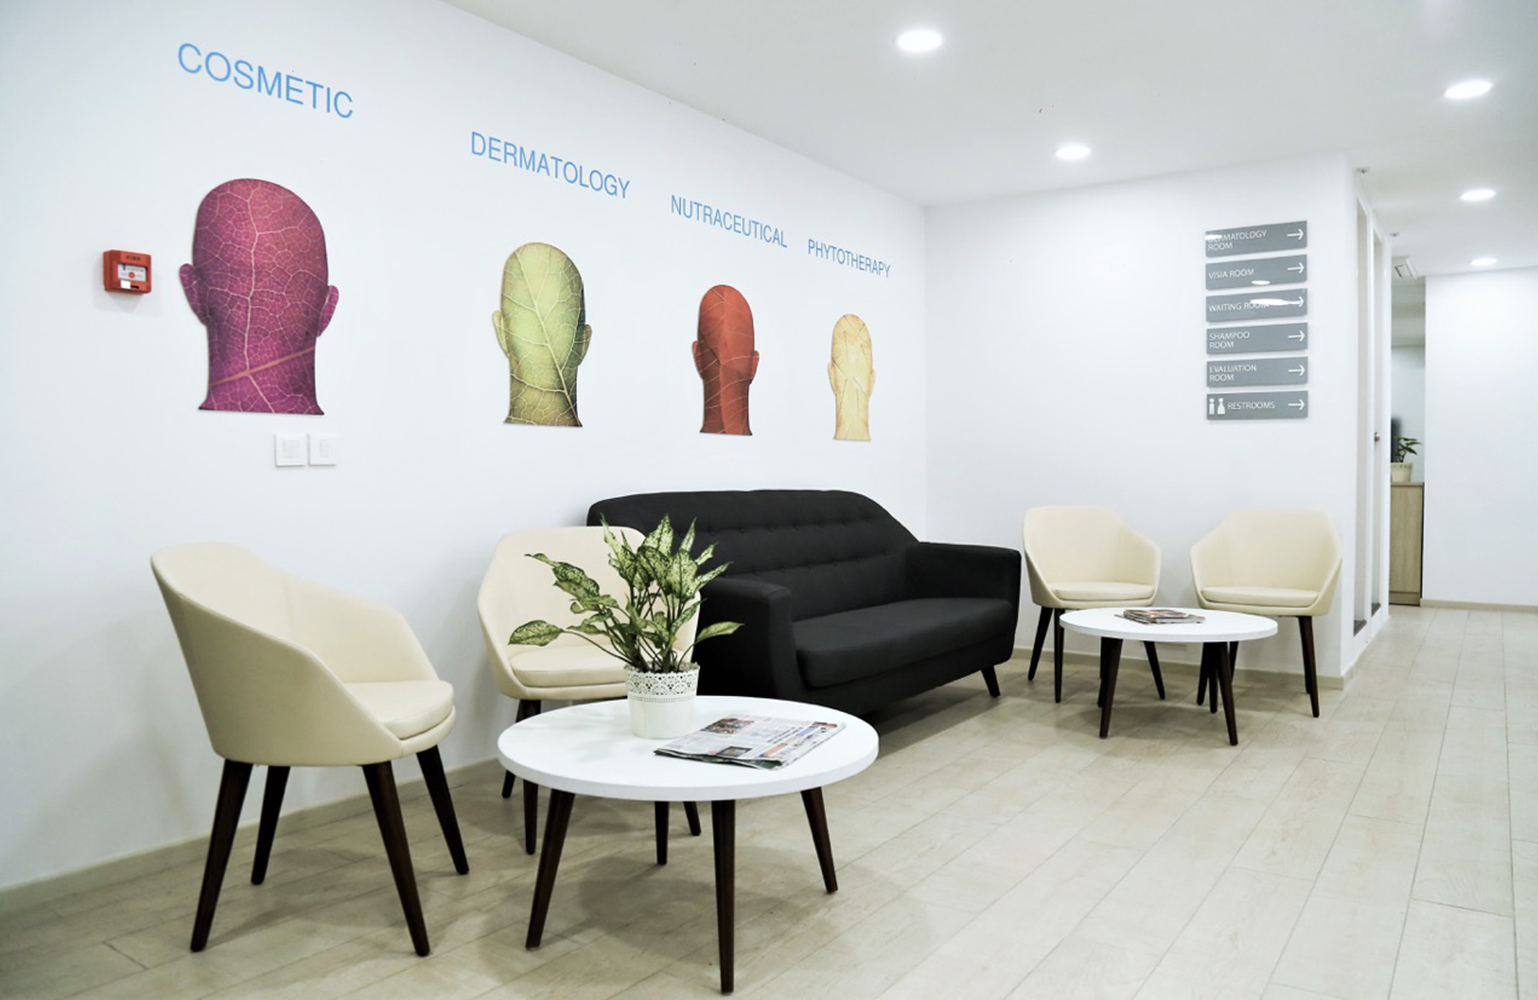 Going clinical with signage at this skincare clinic!